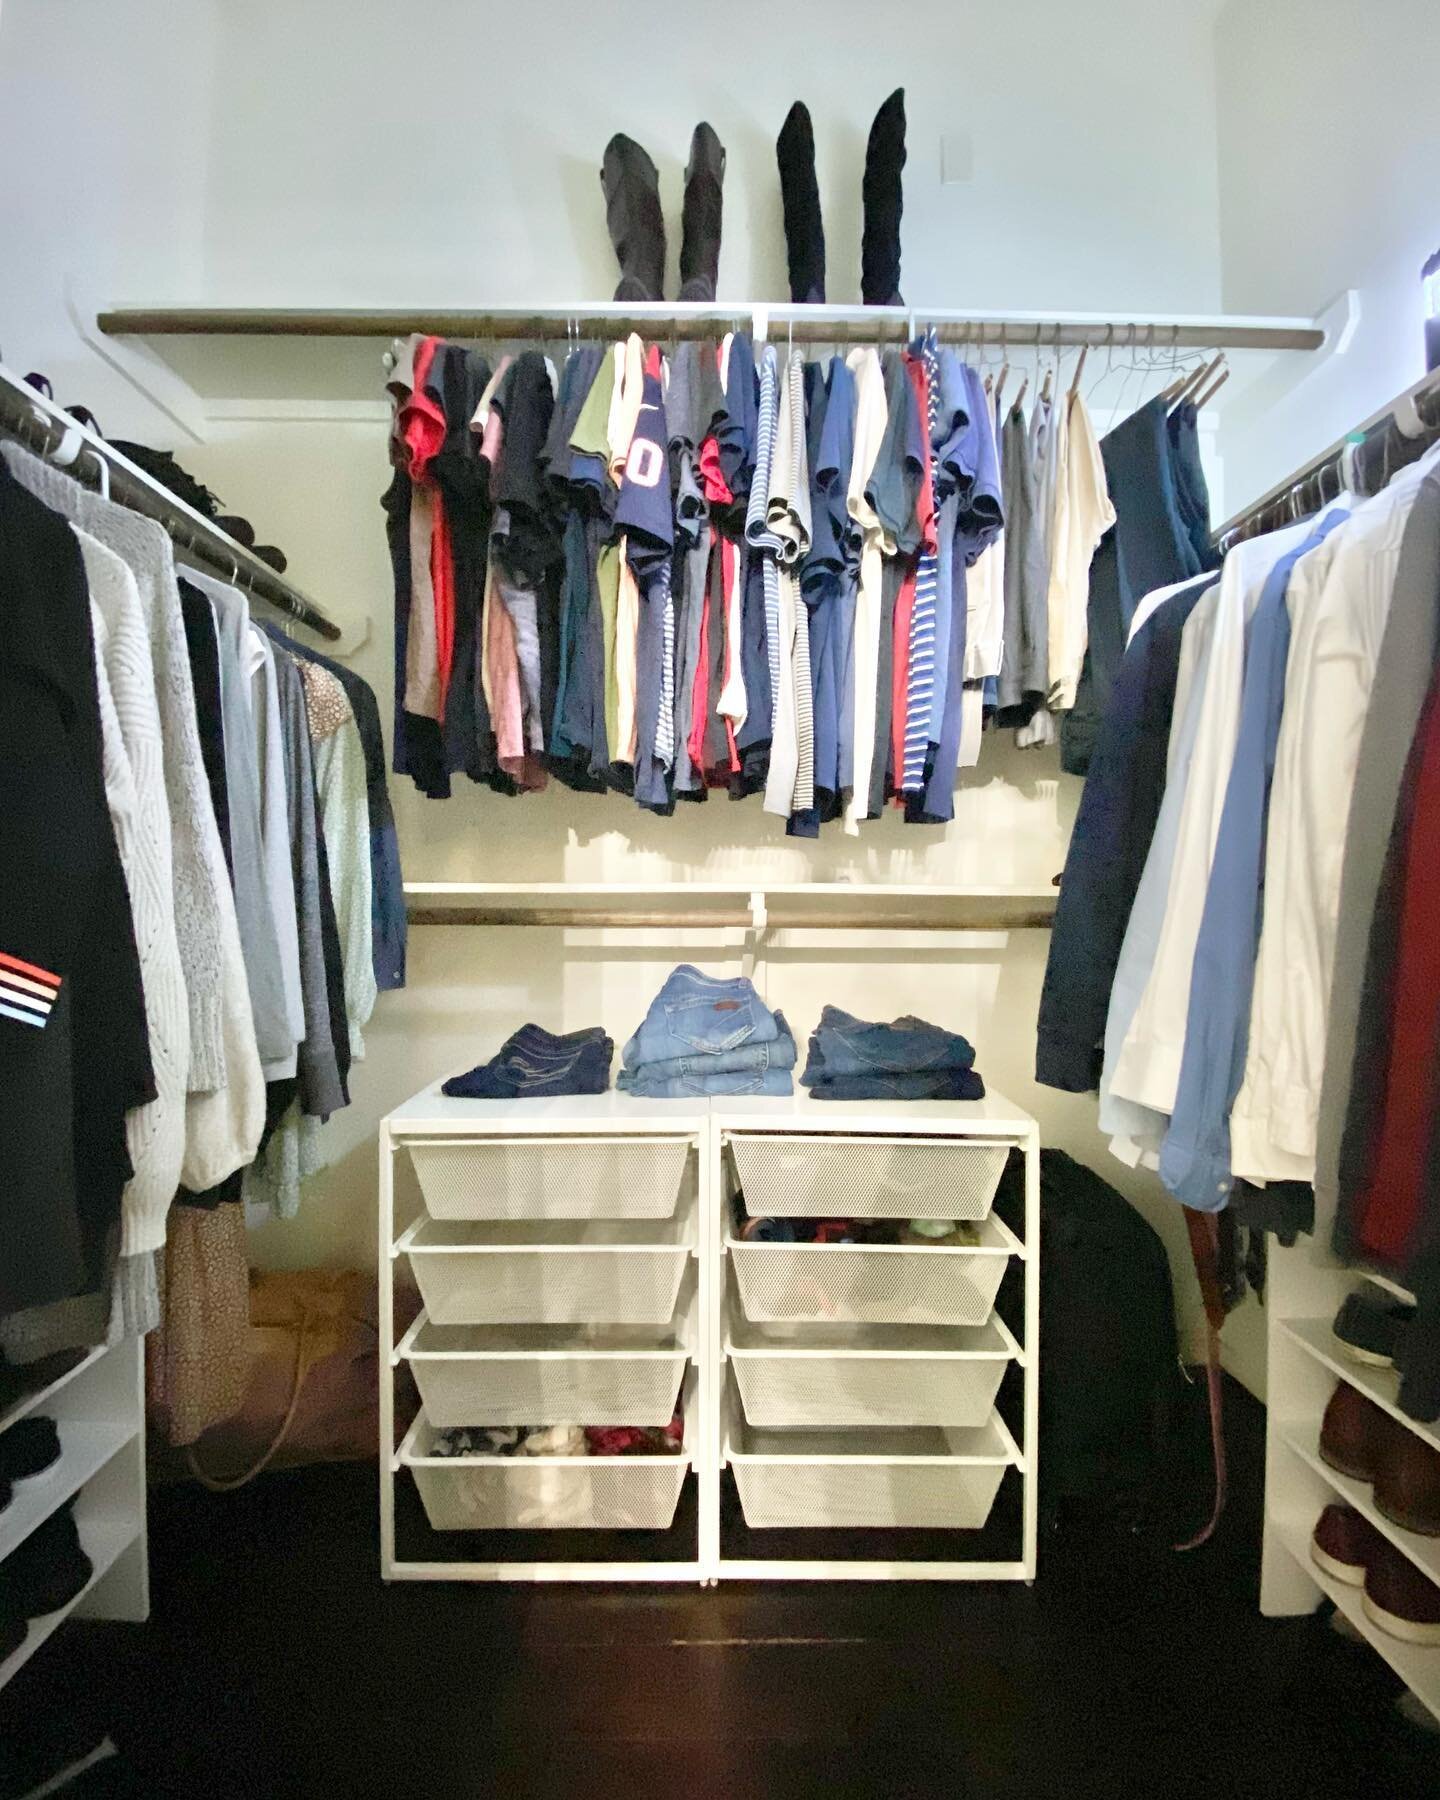 Organization isn&rsquo;t about perfection. It&rsquo;s about creating systems that simplify your routine and eliminate unnecessary steps. 

#closetorganization #closetgoals #homeorganization #houstonorganizer #houstonprofessionalorganizer #houstontx #